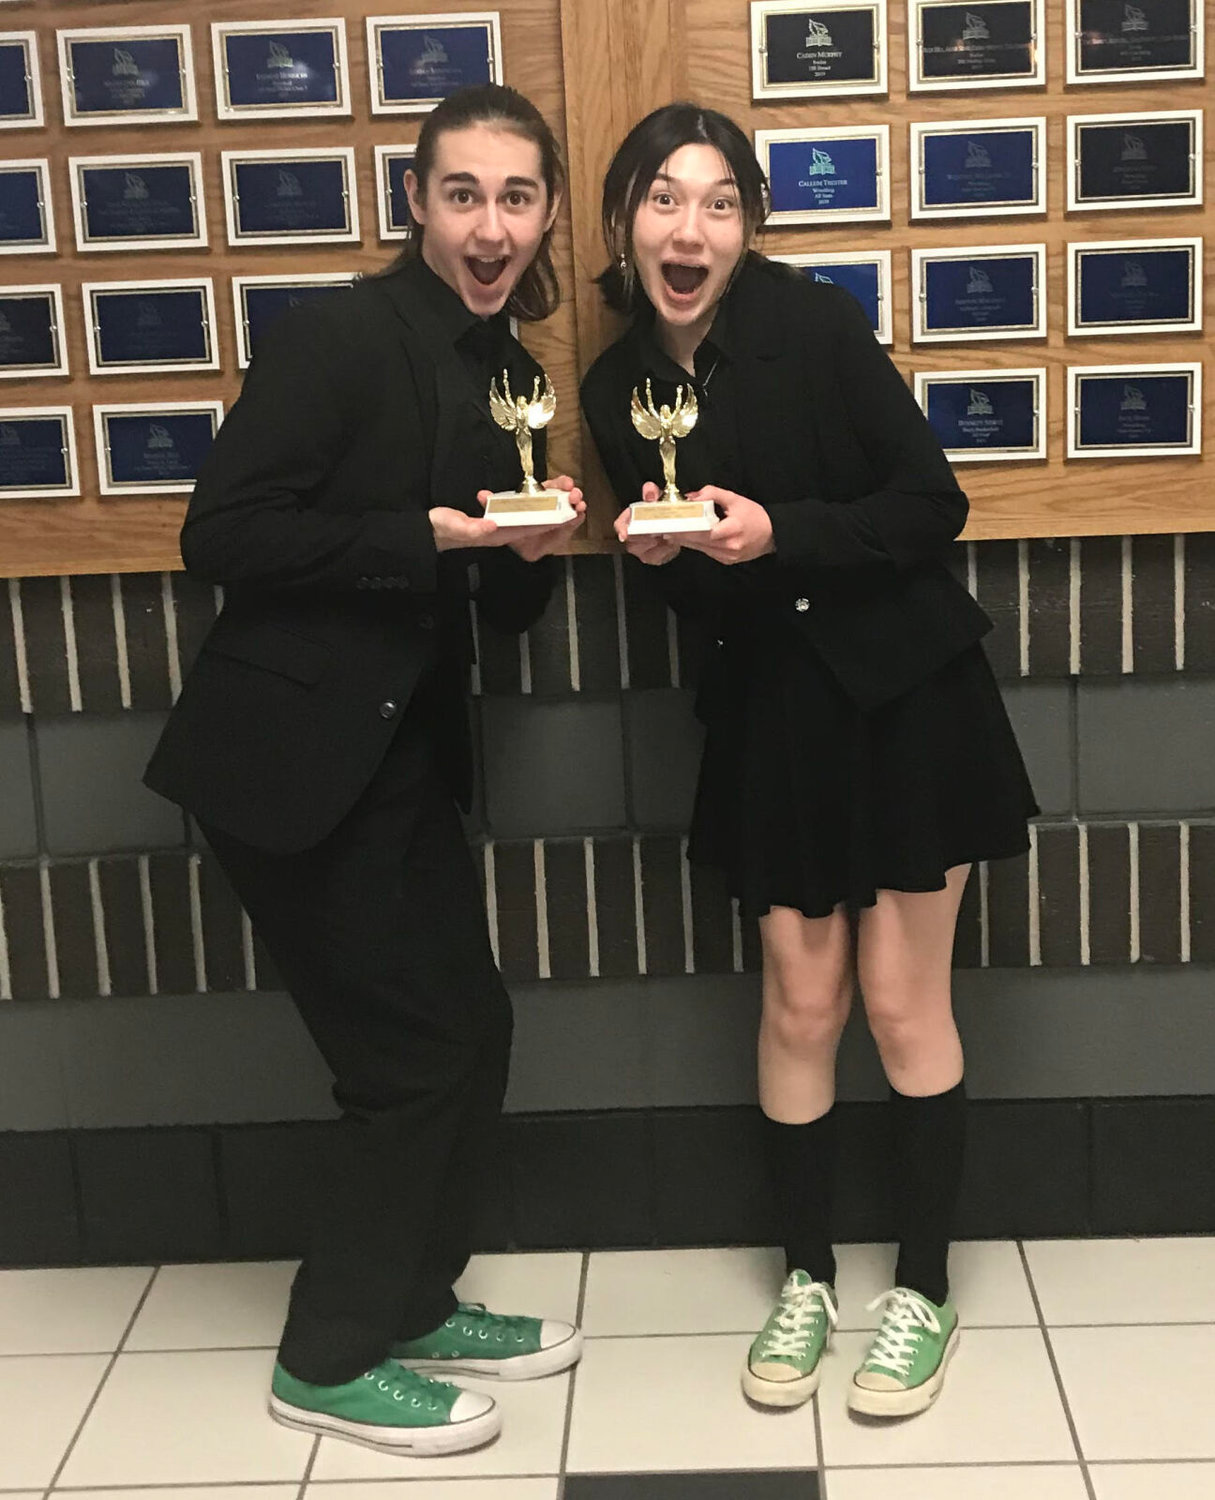 Ian Thompson and Mya Doty brought home fifth place in Duo Interpretation at the Liberty Invitational on January 13 and 14. The team competed against 48 other schools, with categories for competition having competitors upwards of 100 in some categories.